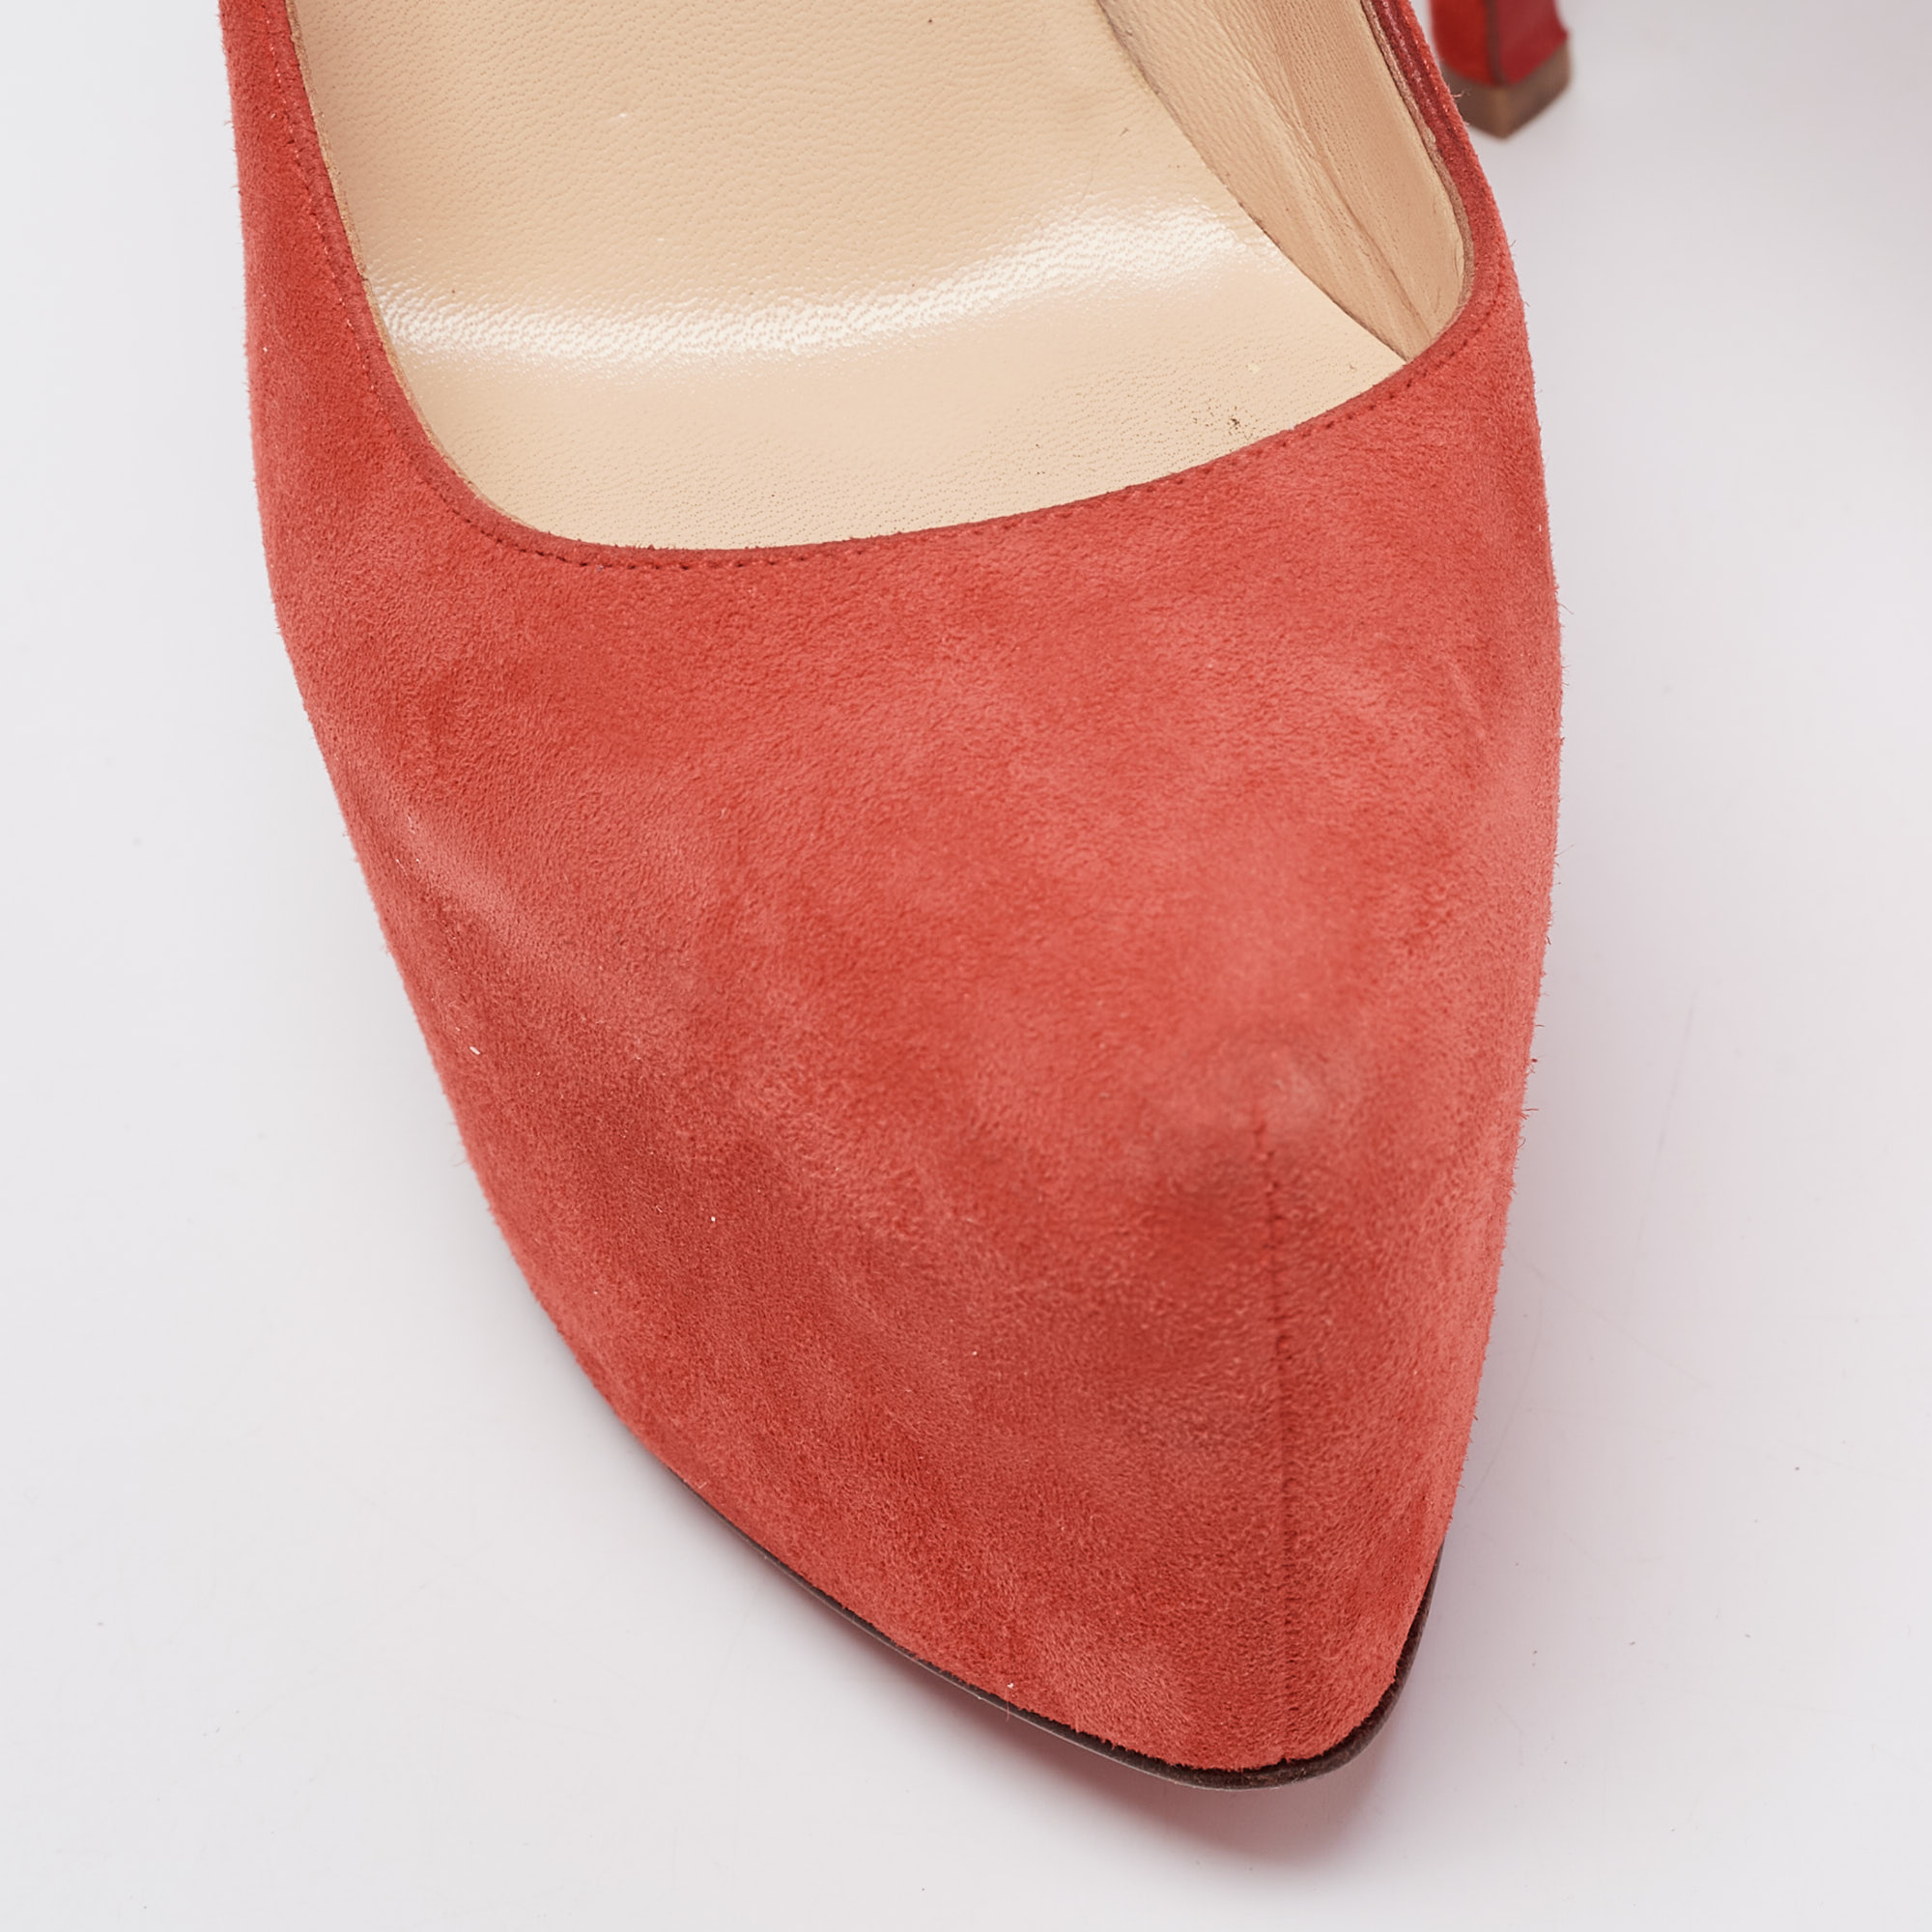 Christian Louboutin Coral Red Suede Daffodile Platform Pumps Size 36